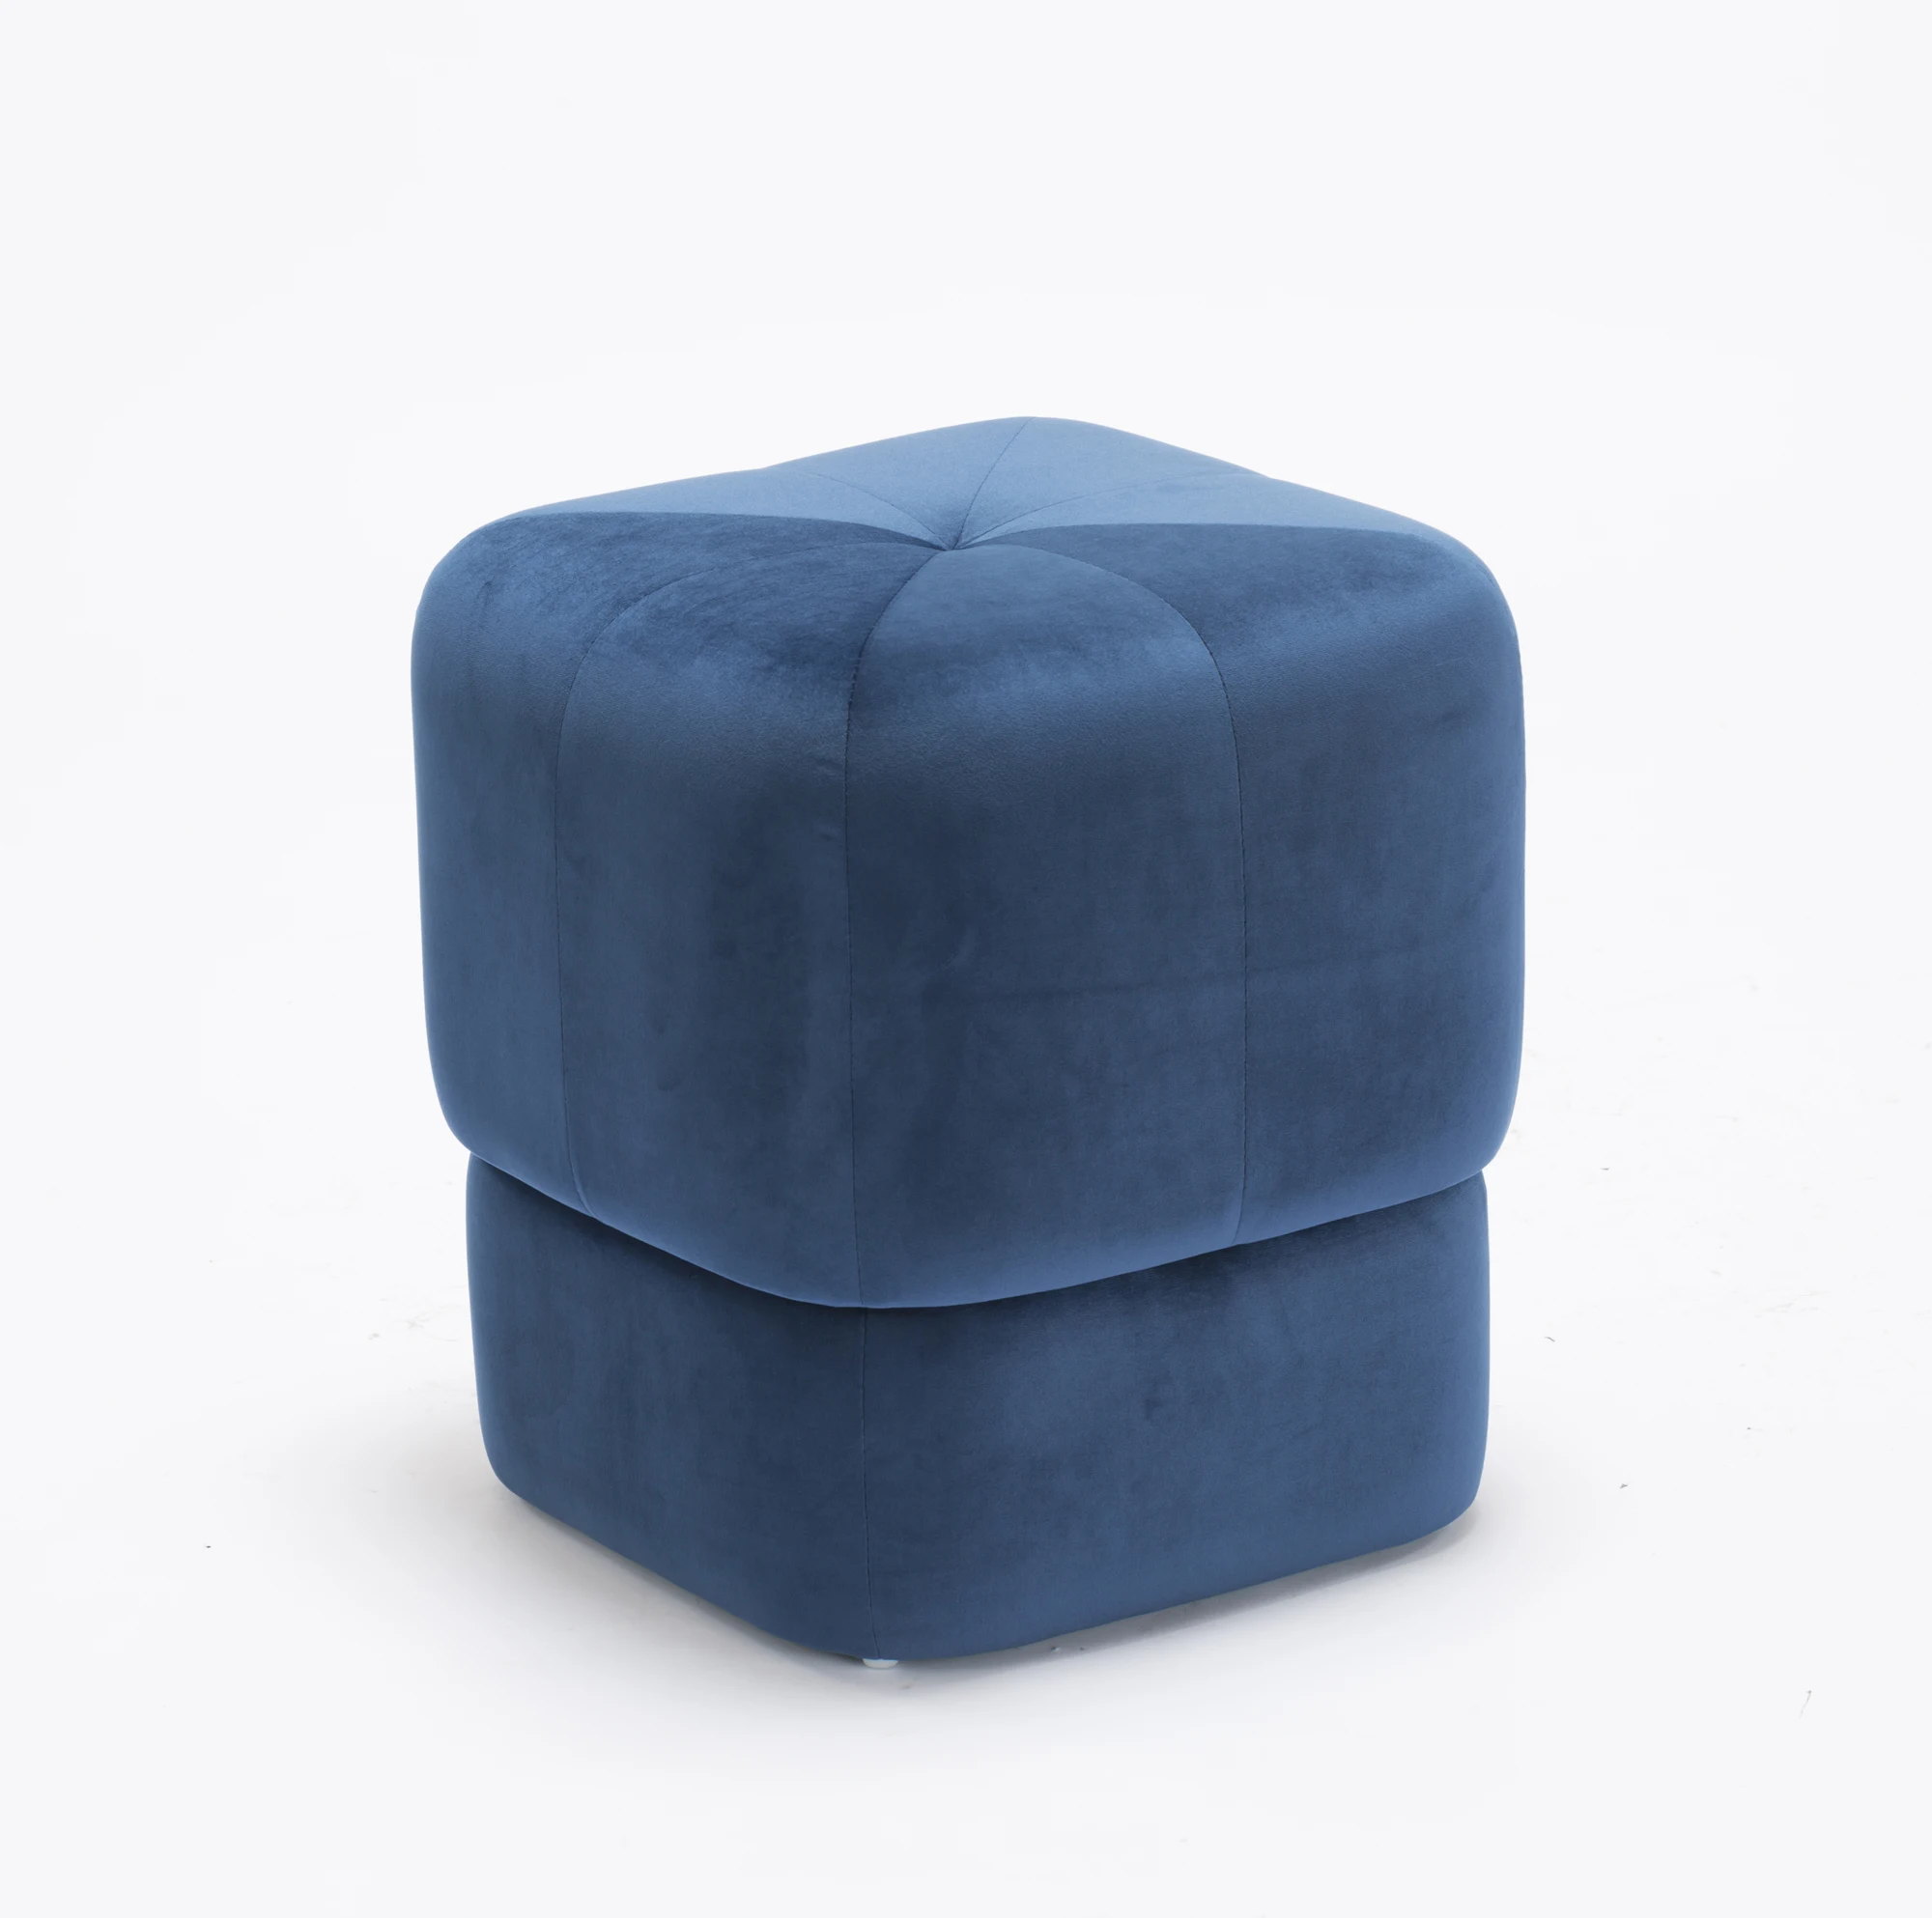 Hippo Truffle Round Bean Bag Footstool Pouffe Seat in Shiny Crushed Velvet Fabric